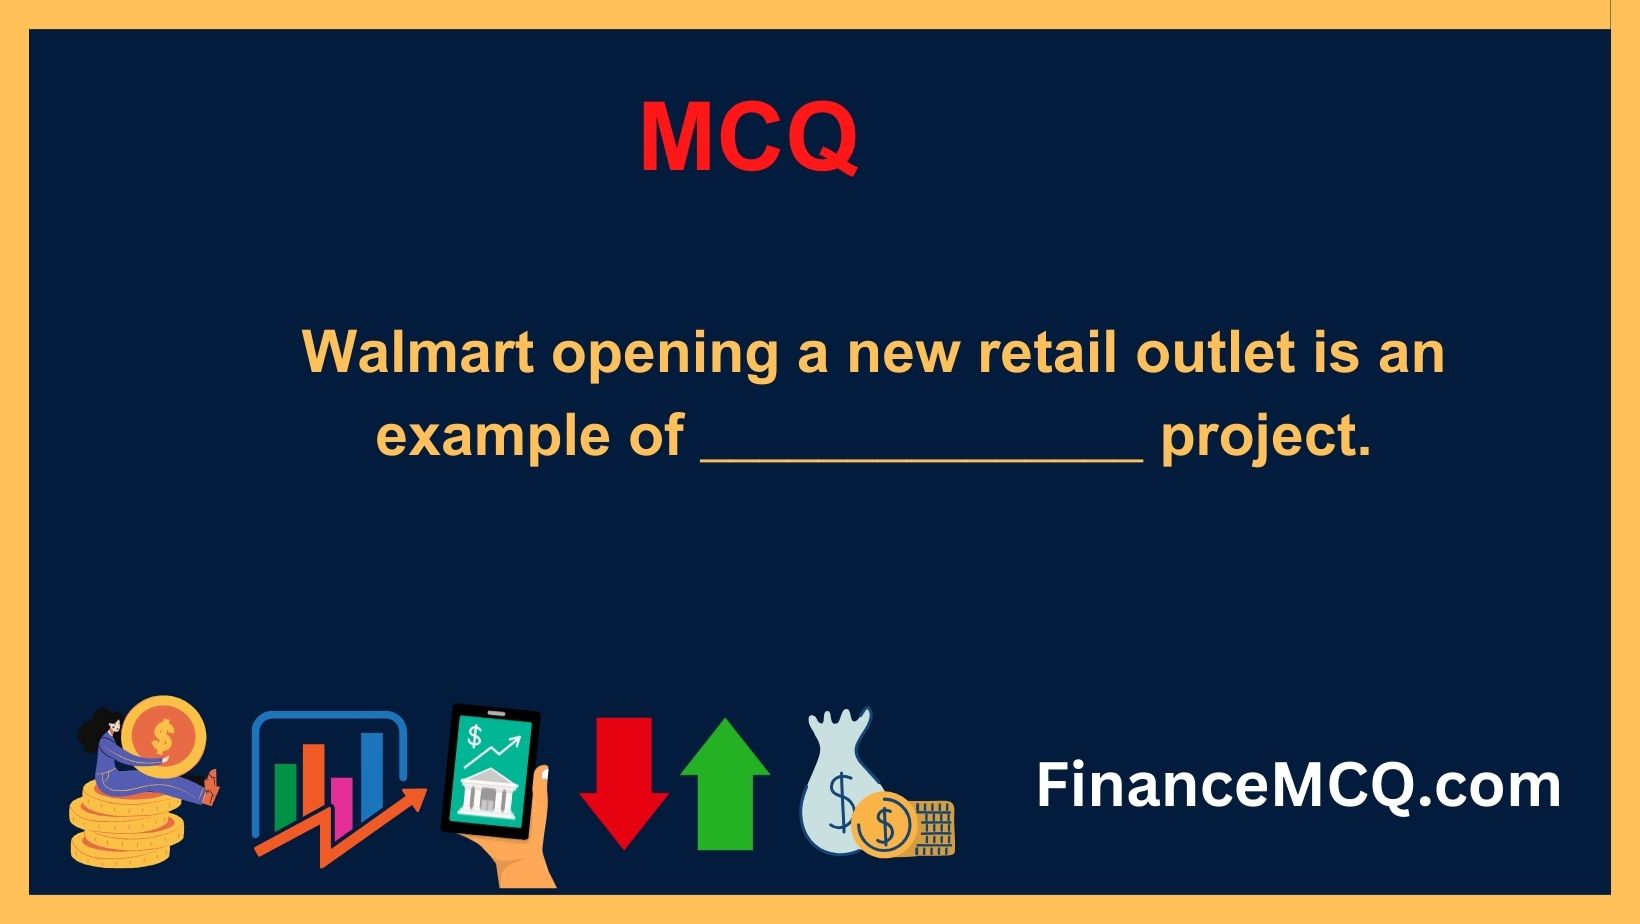 Walmart opening a new retail outlet is an example of _______________ project.